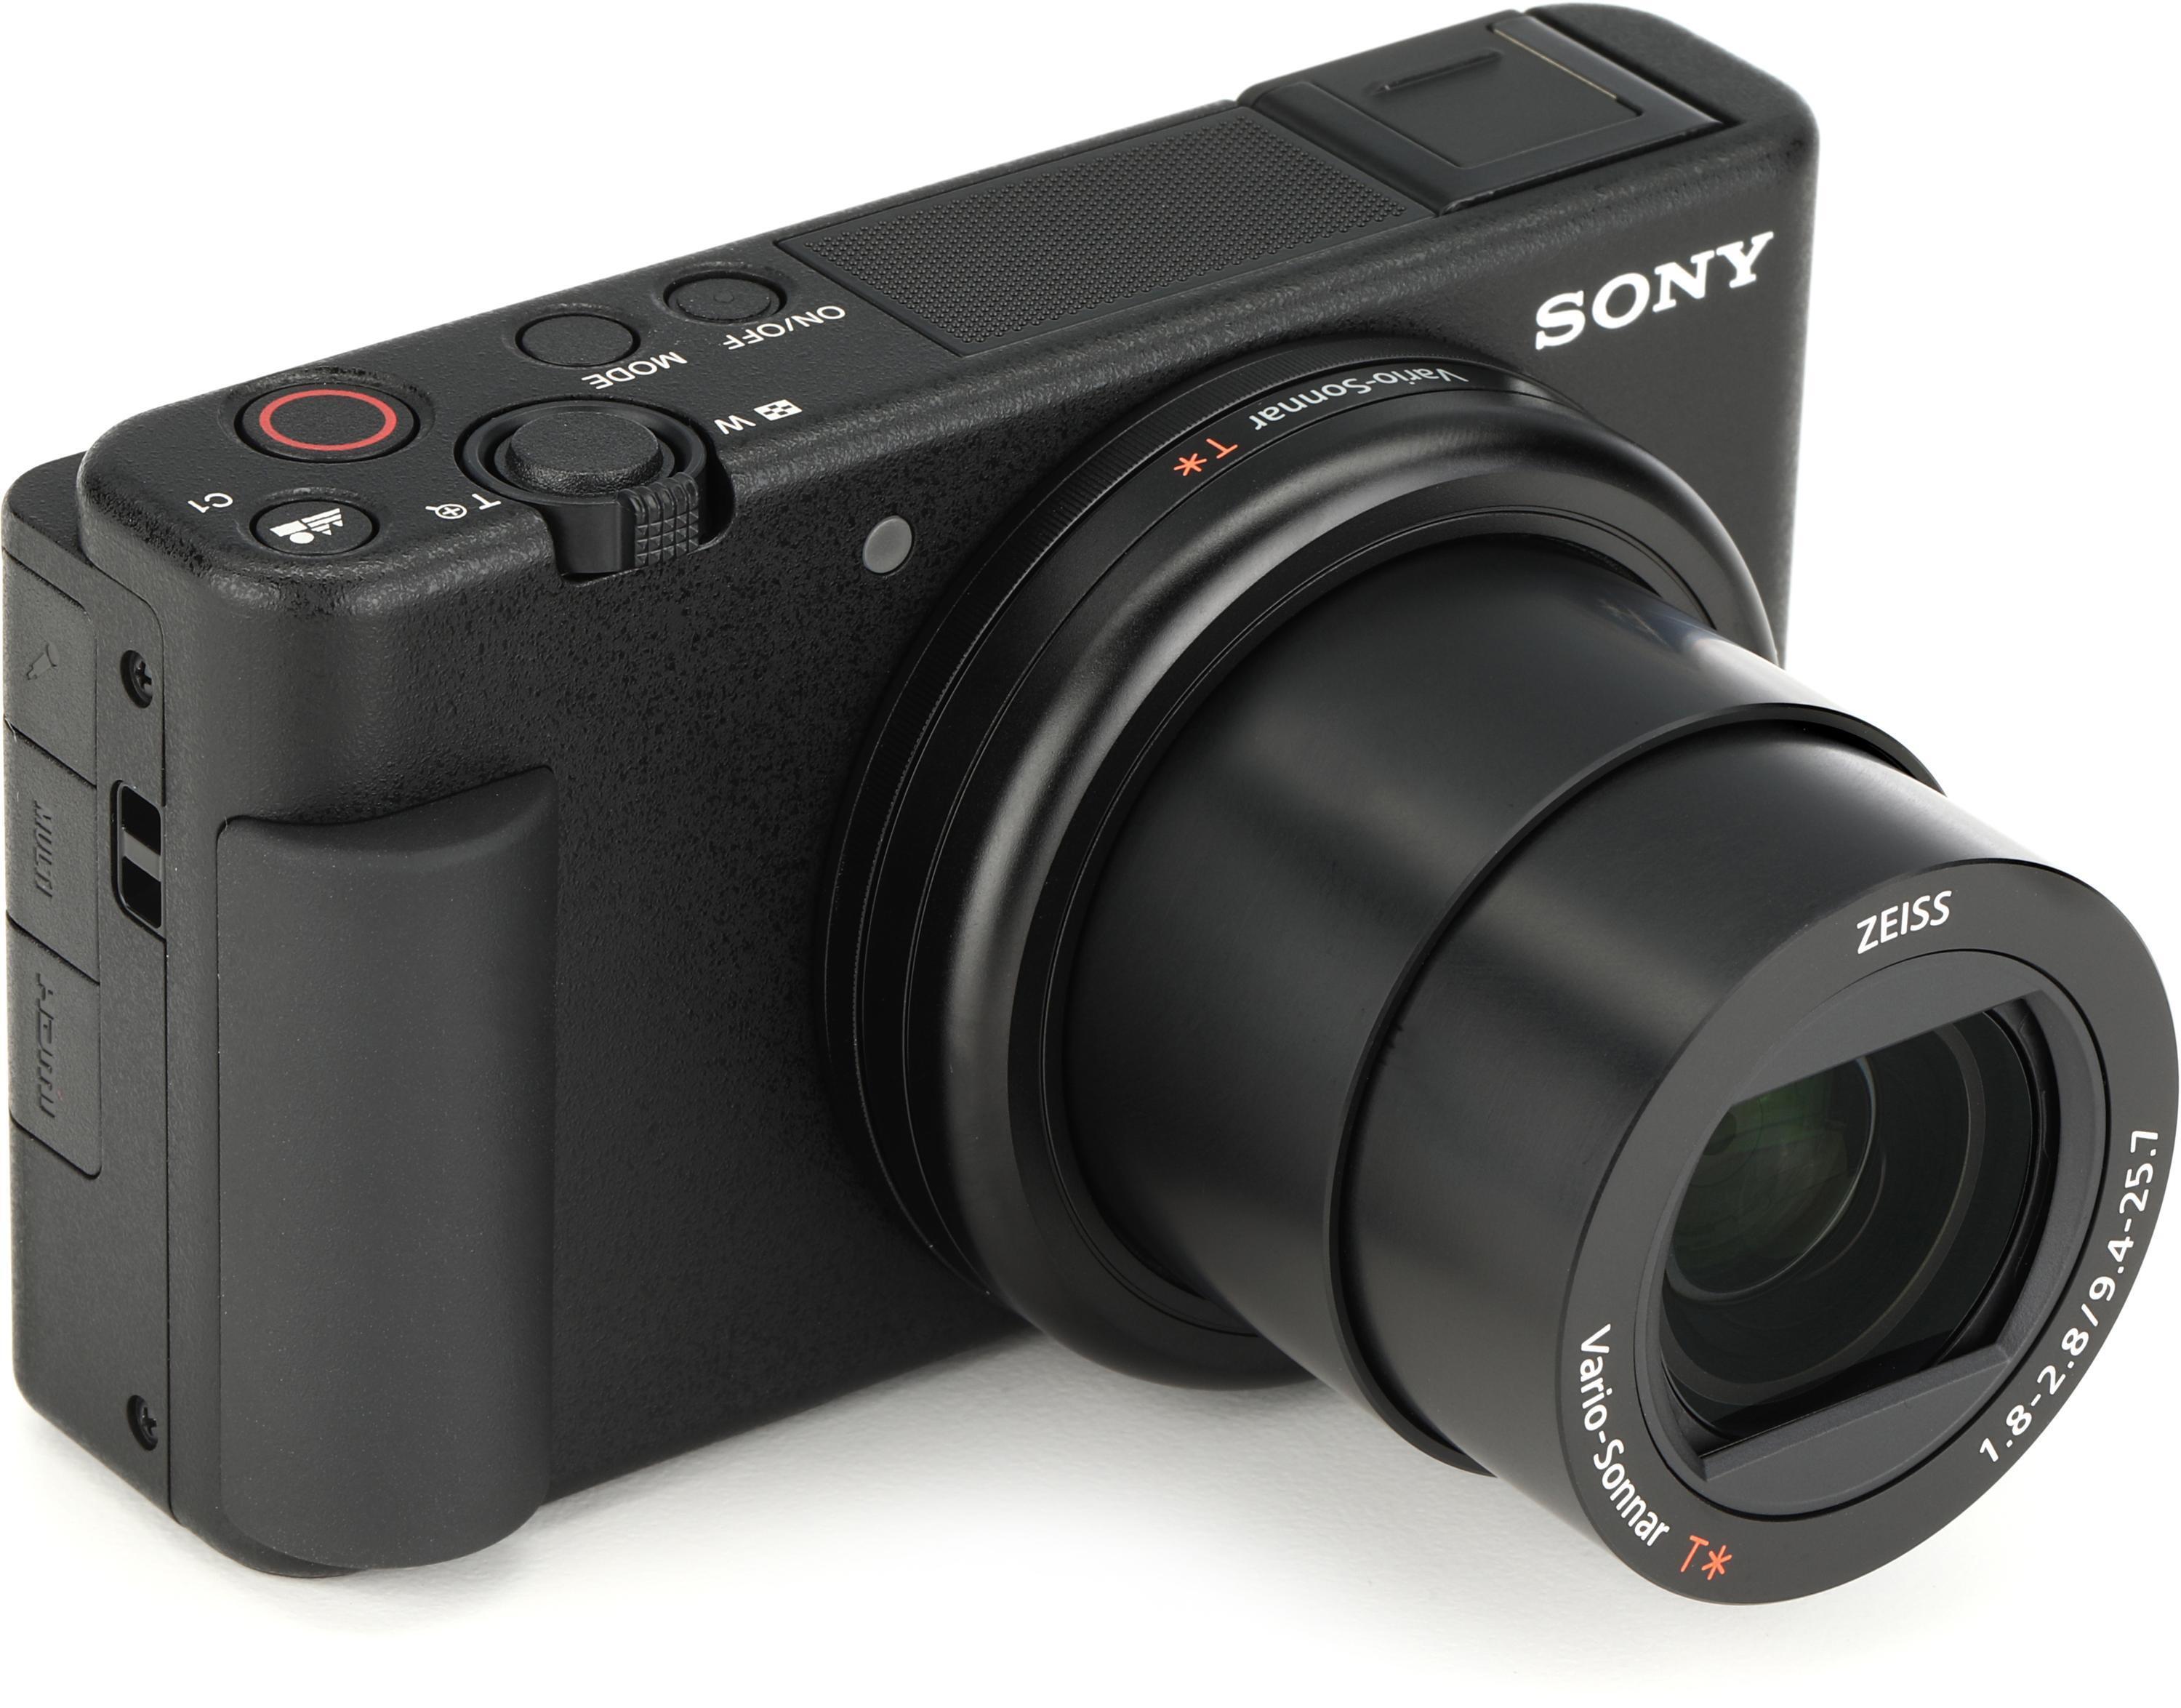 Sony zve10 lens • Compare (6 products) see prices »